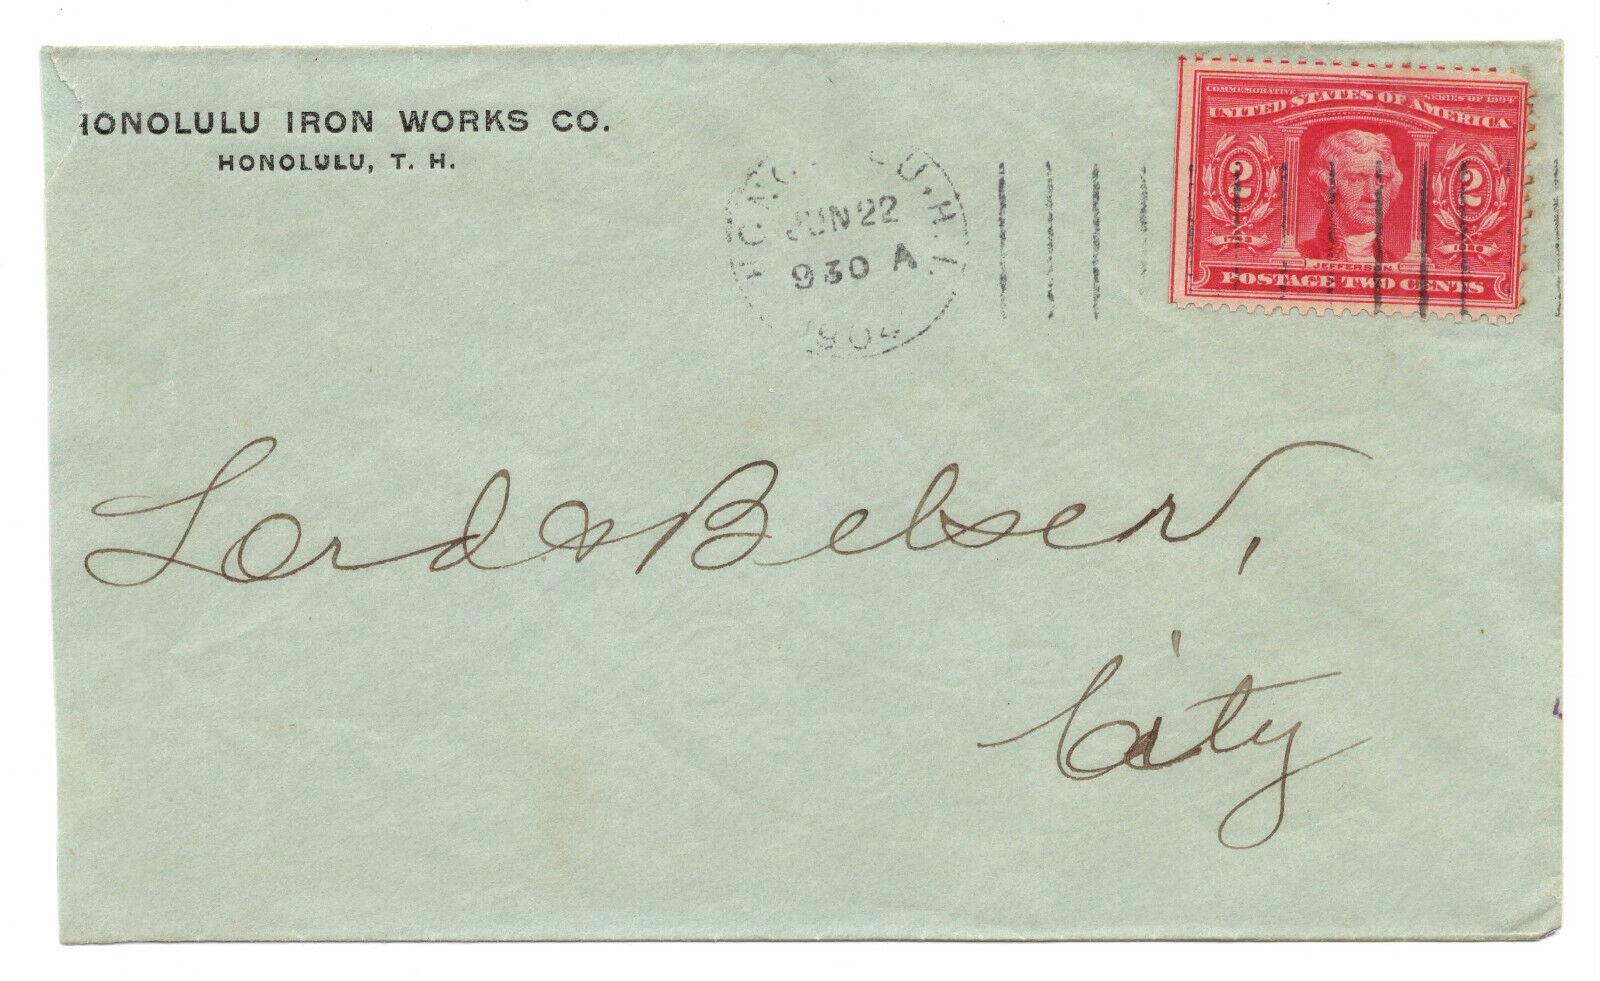 1904 Cover~ Honolulu Iron Works Co. to LORD & BESLER Construction Firm ~ HAWAII